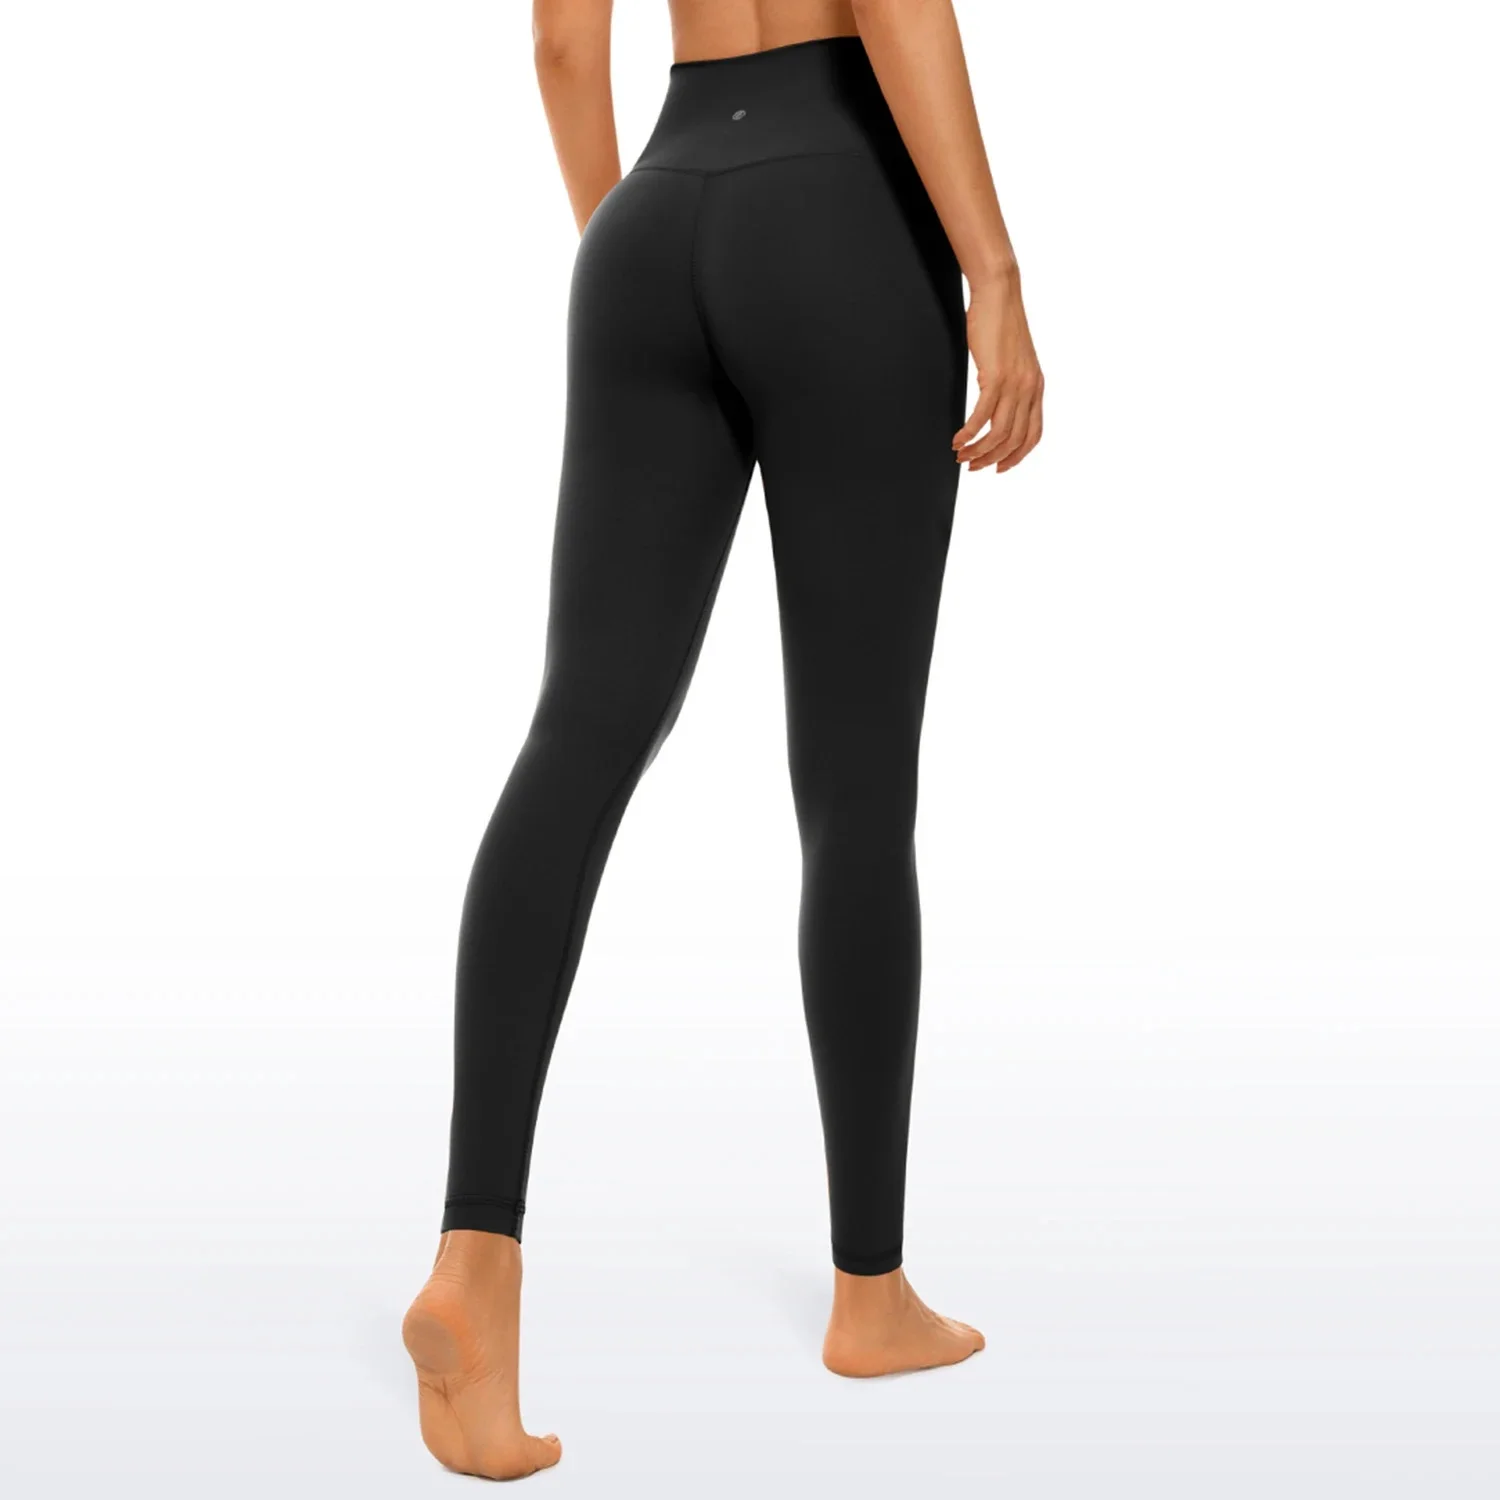 CRZ YOGA Butterluxe Extra Long Leggings for Tall Women 31 Inches